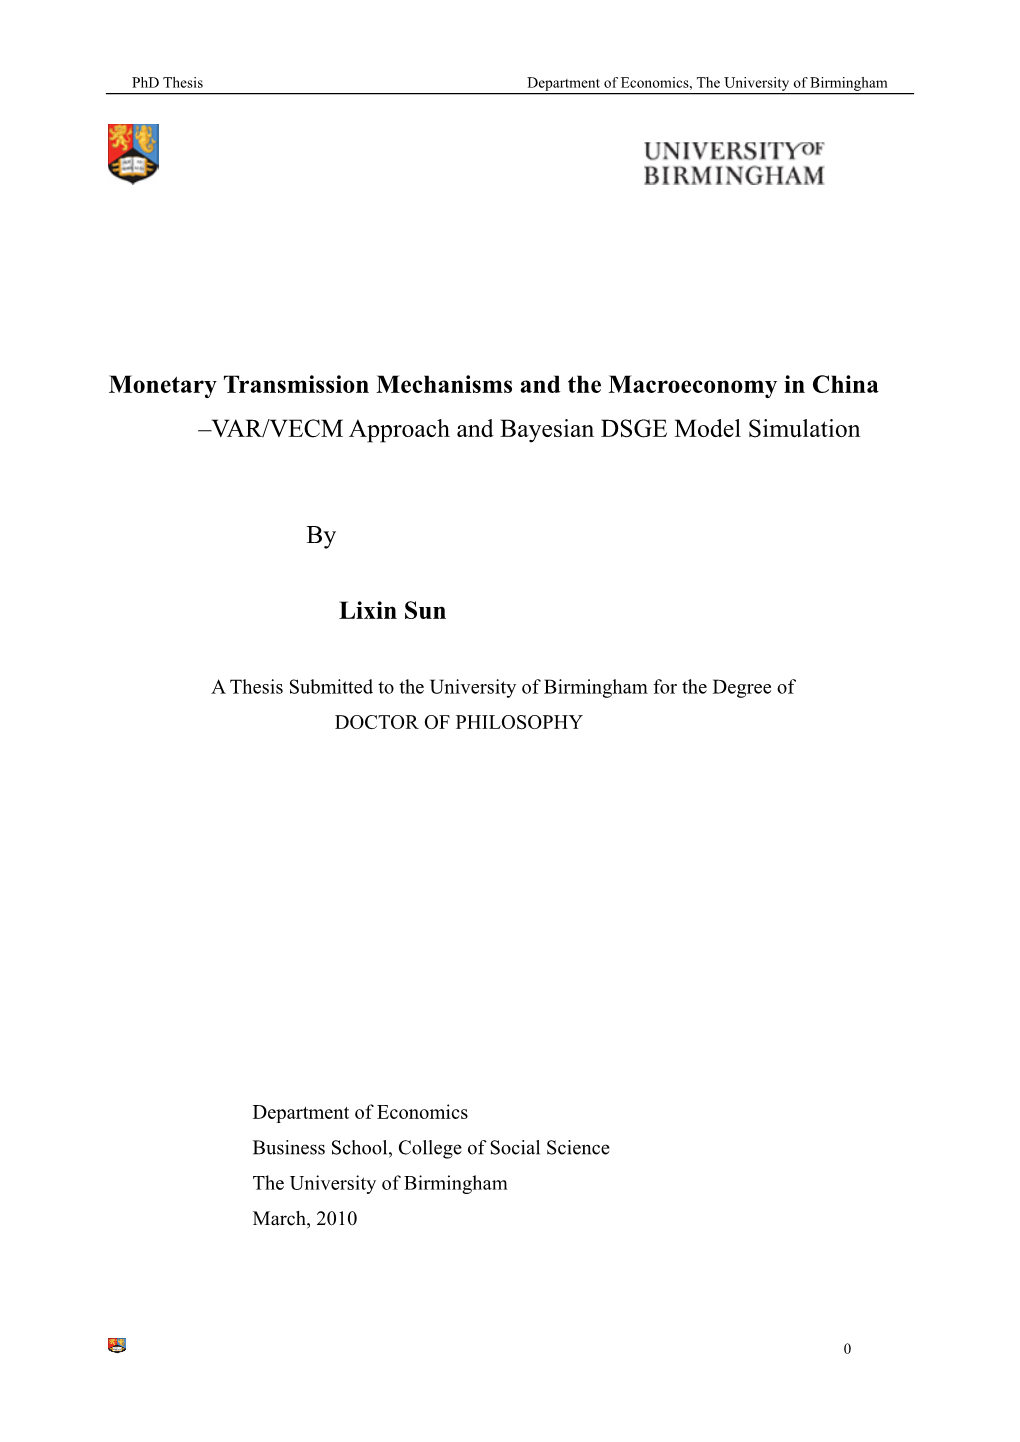 Monetary Transmission Mechanisms and the Macroeconomy in China –VAR/VECM Approach and Bayesian DSGE Model Simulation